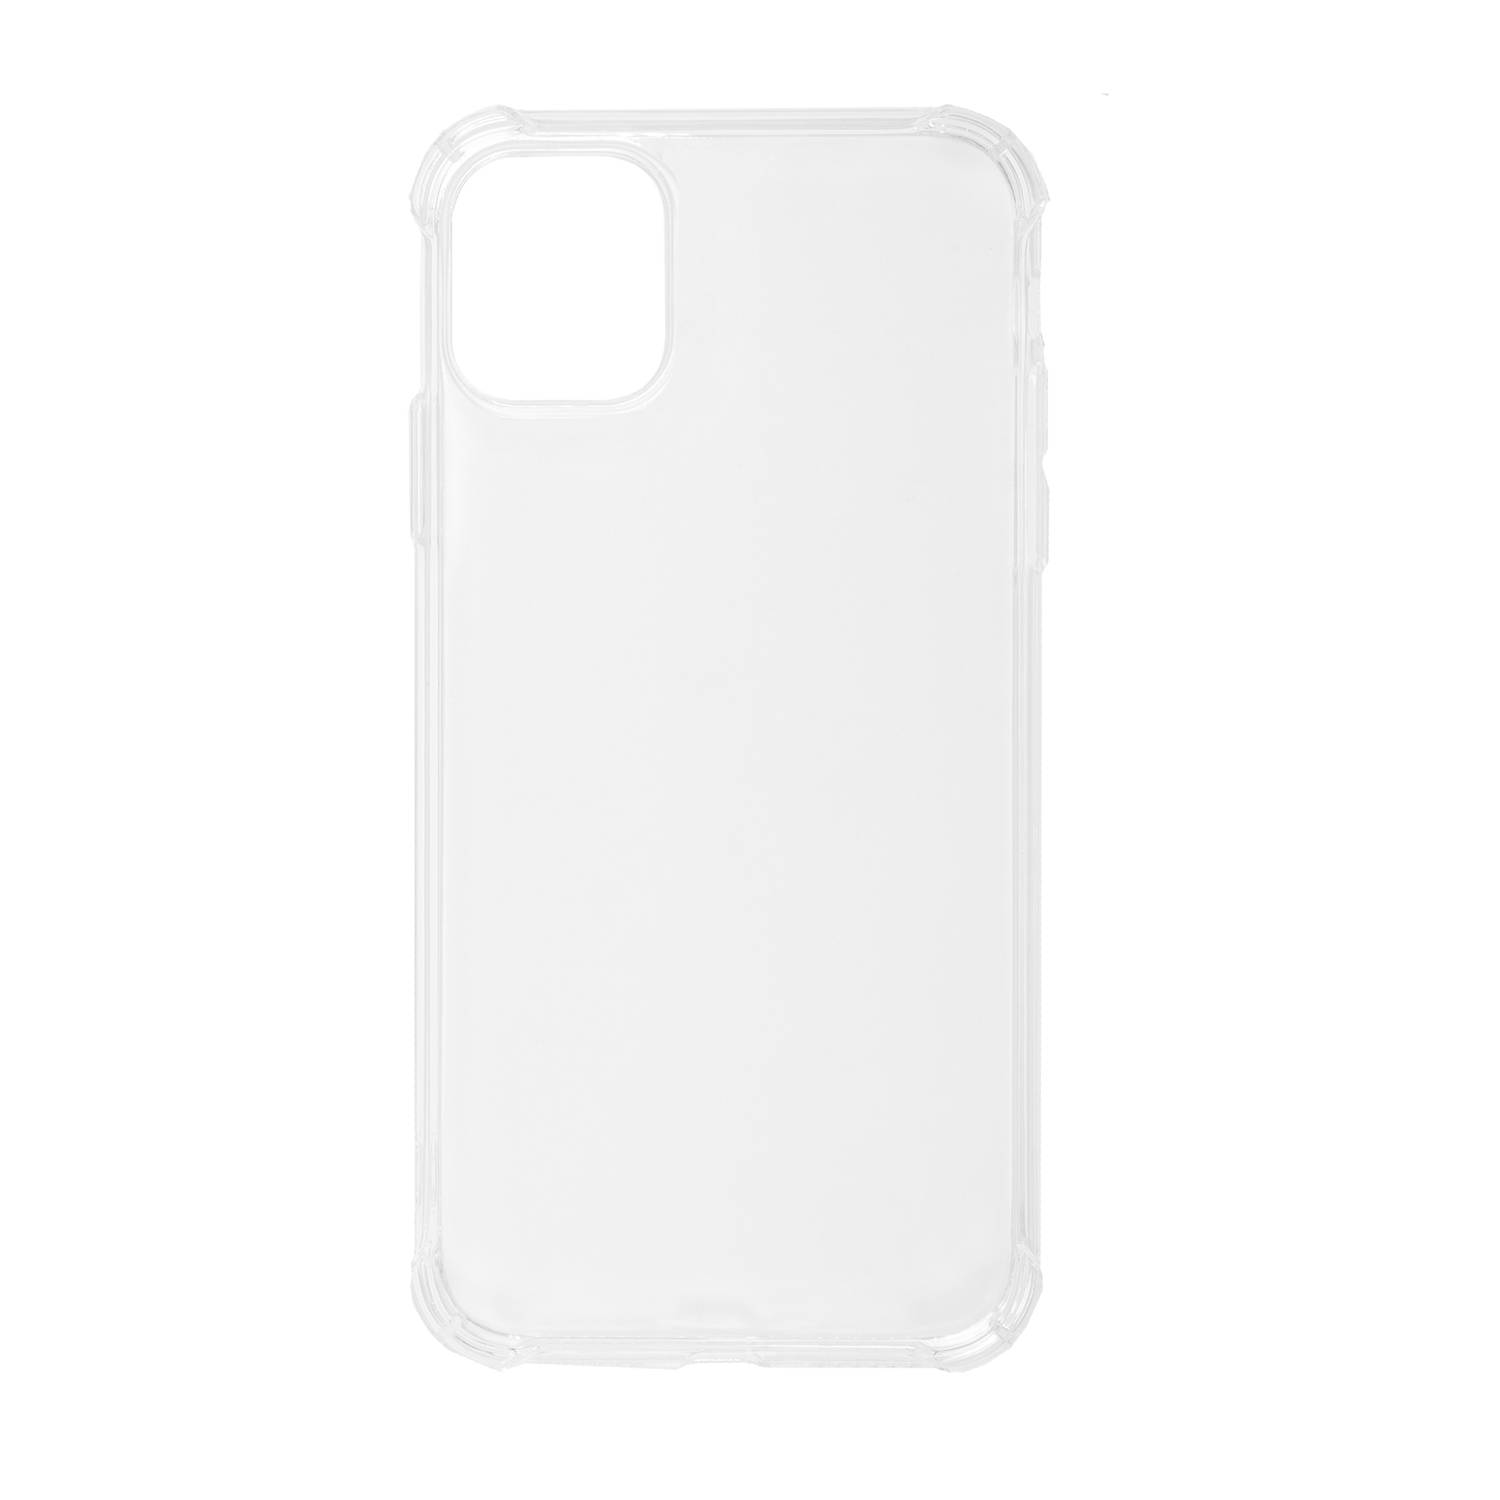 BMAX TPU soft case hoesje voor Apple iPhone 11 Pro / Soft cover - Transparant